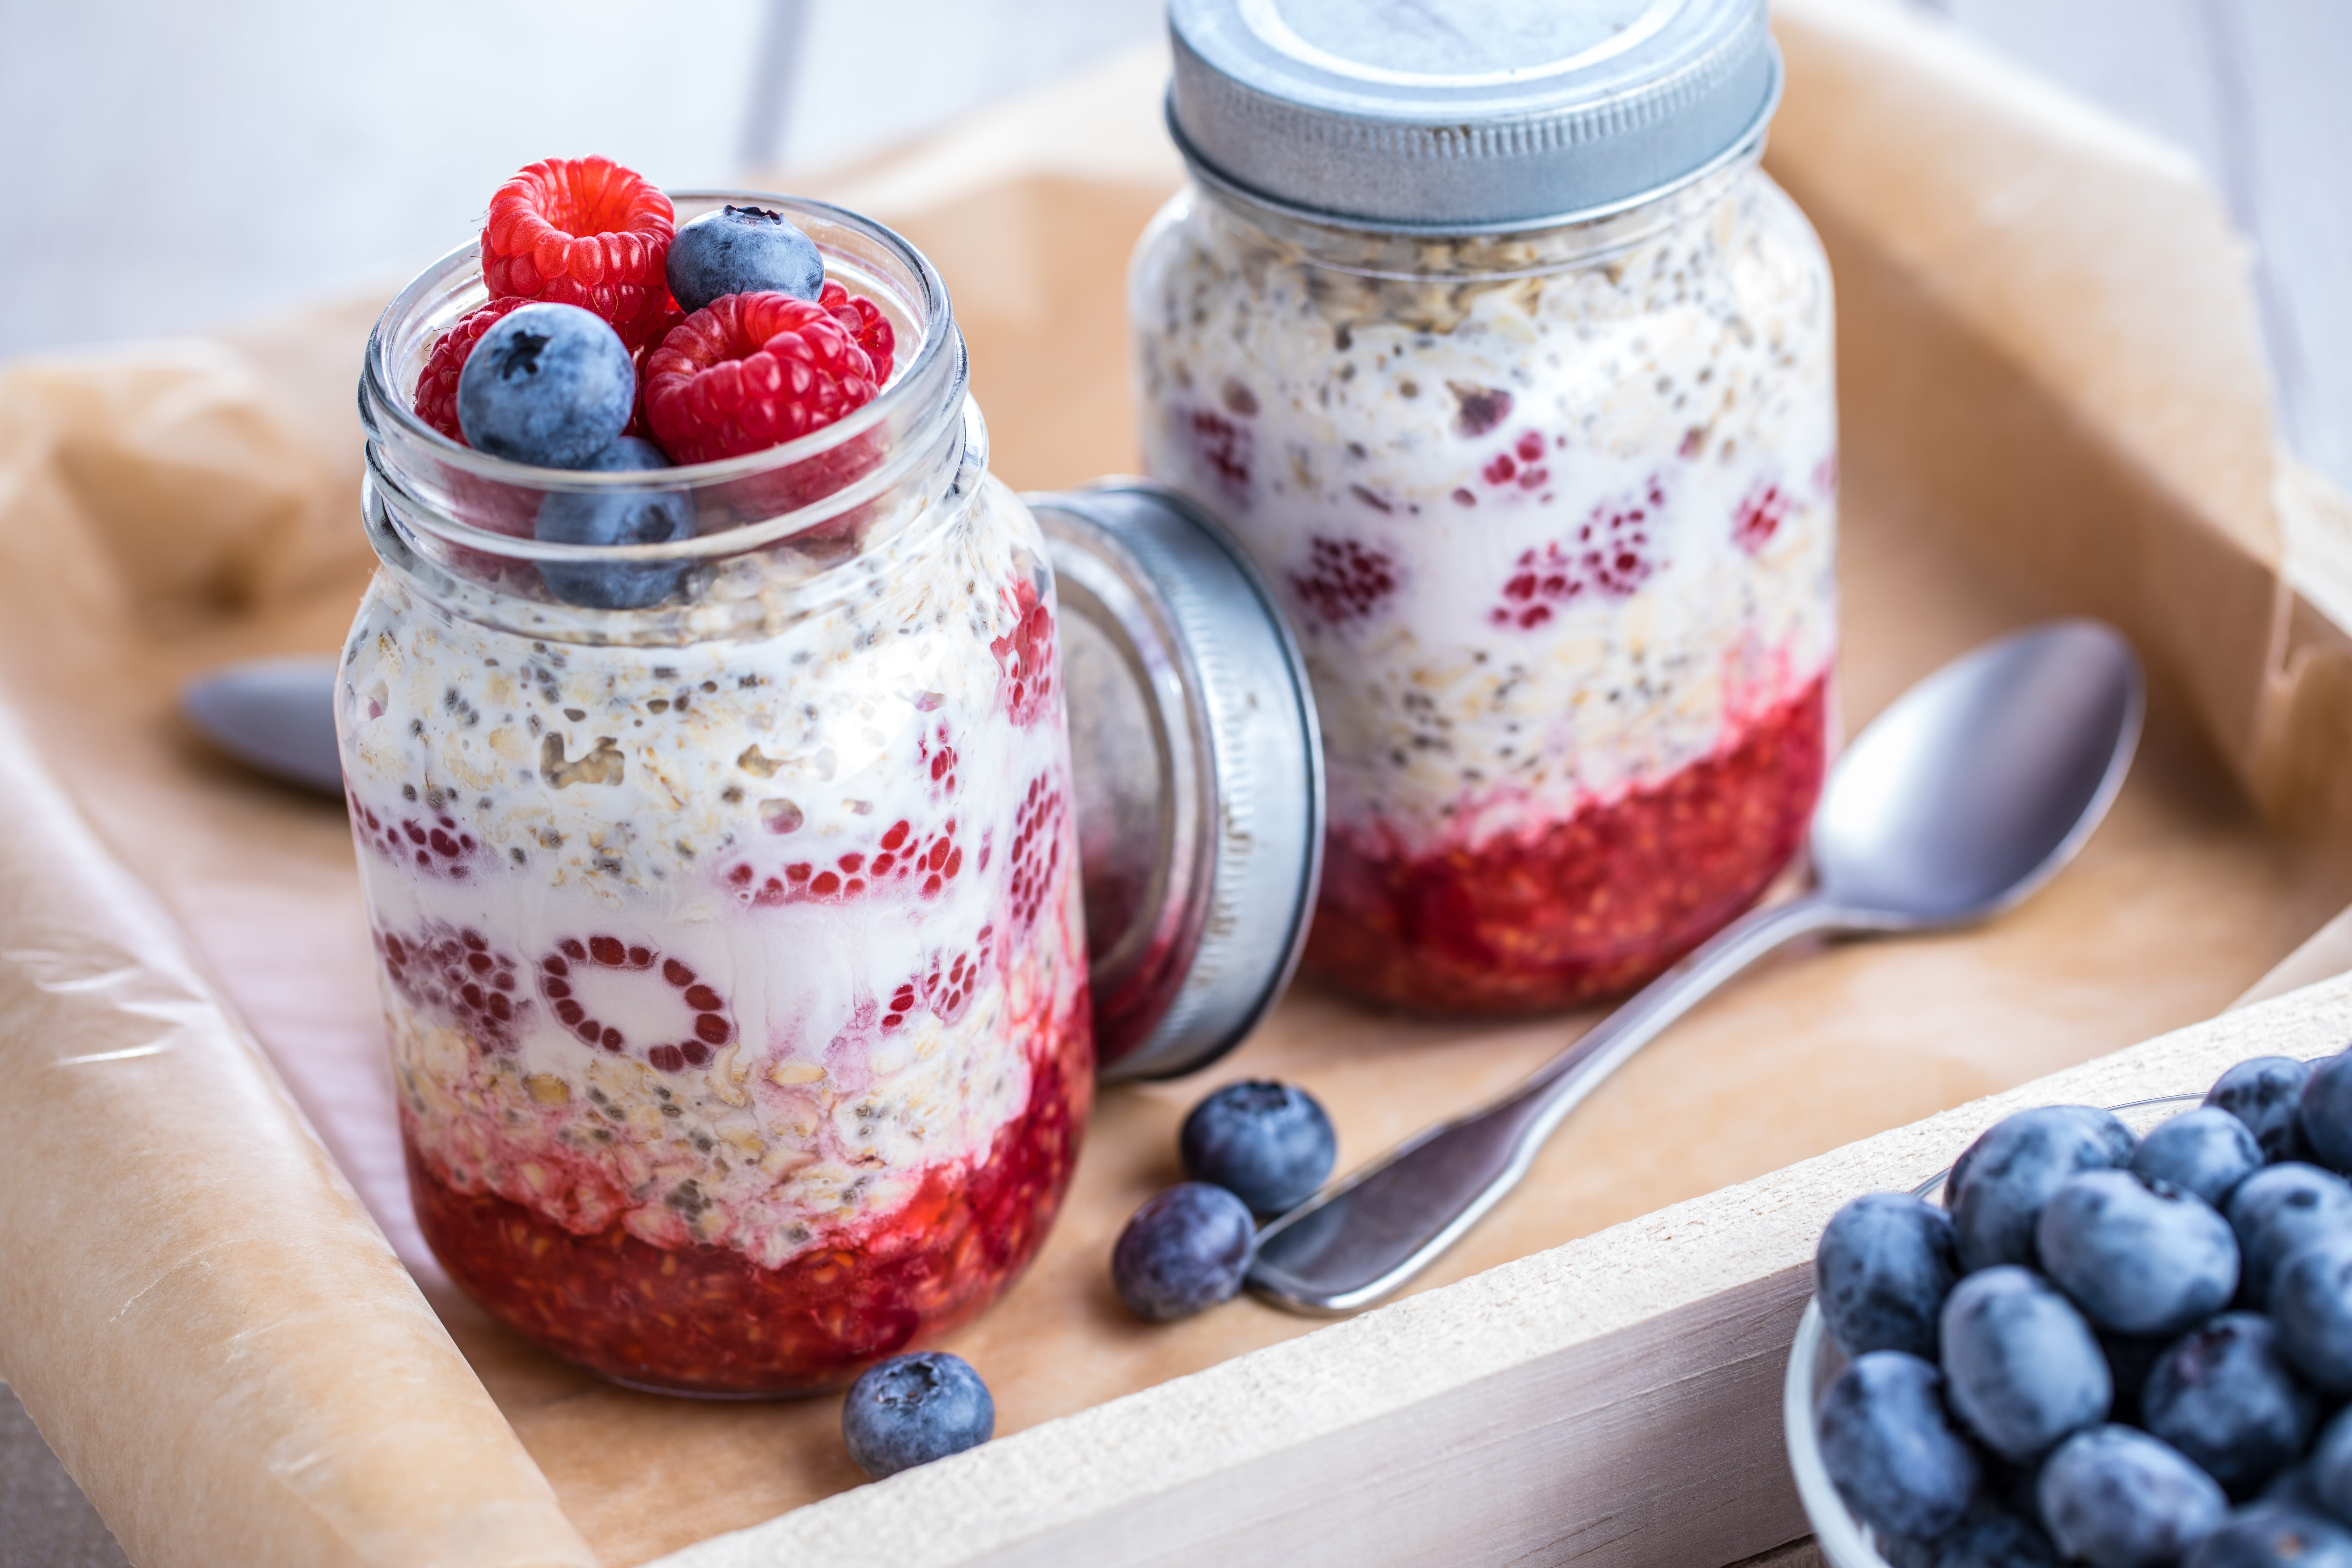 Breakfast in a Jar - Overnight Oats with Berries